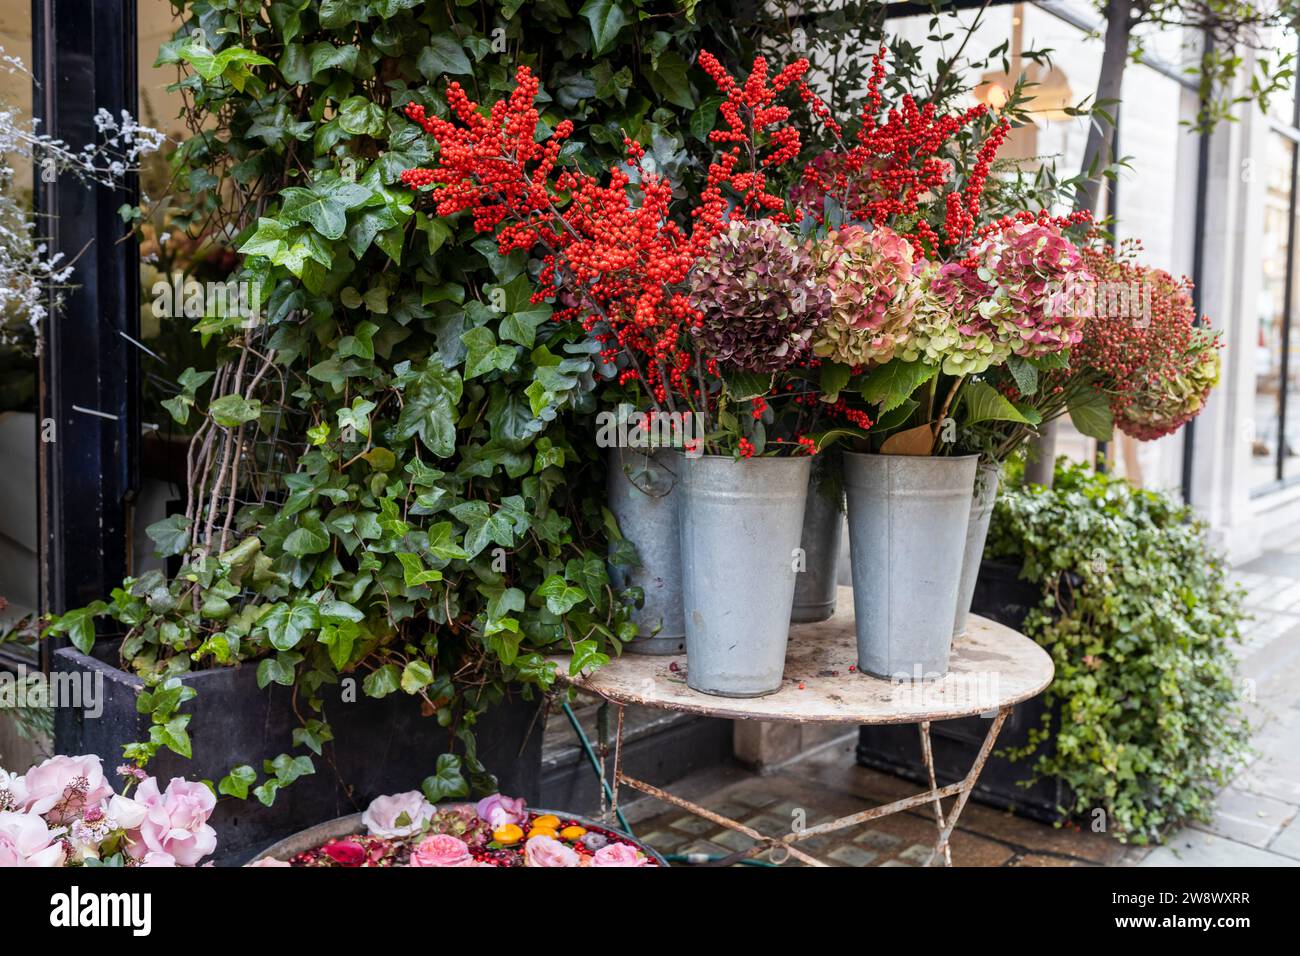 Ornamental shrubs of red and purple hydrangeas and petunias in large outdoor pots line the border of outdoor cafes and restaurants Stock Photo